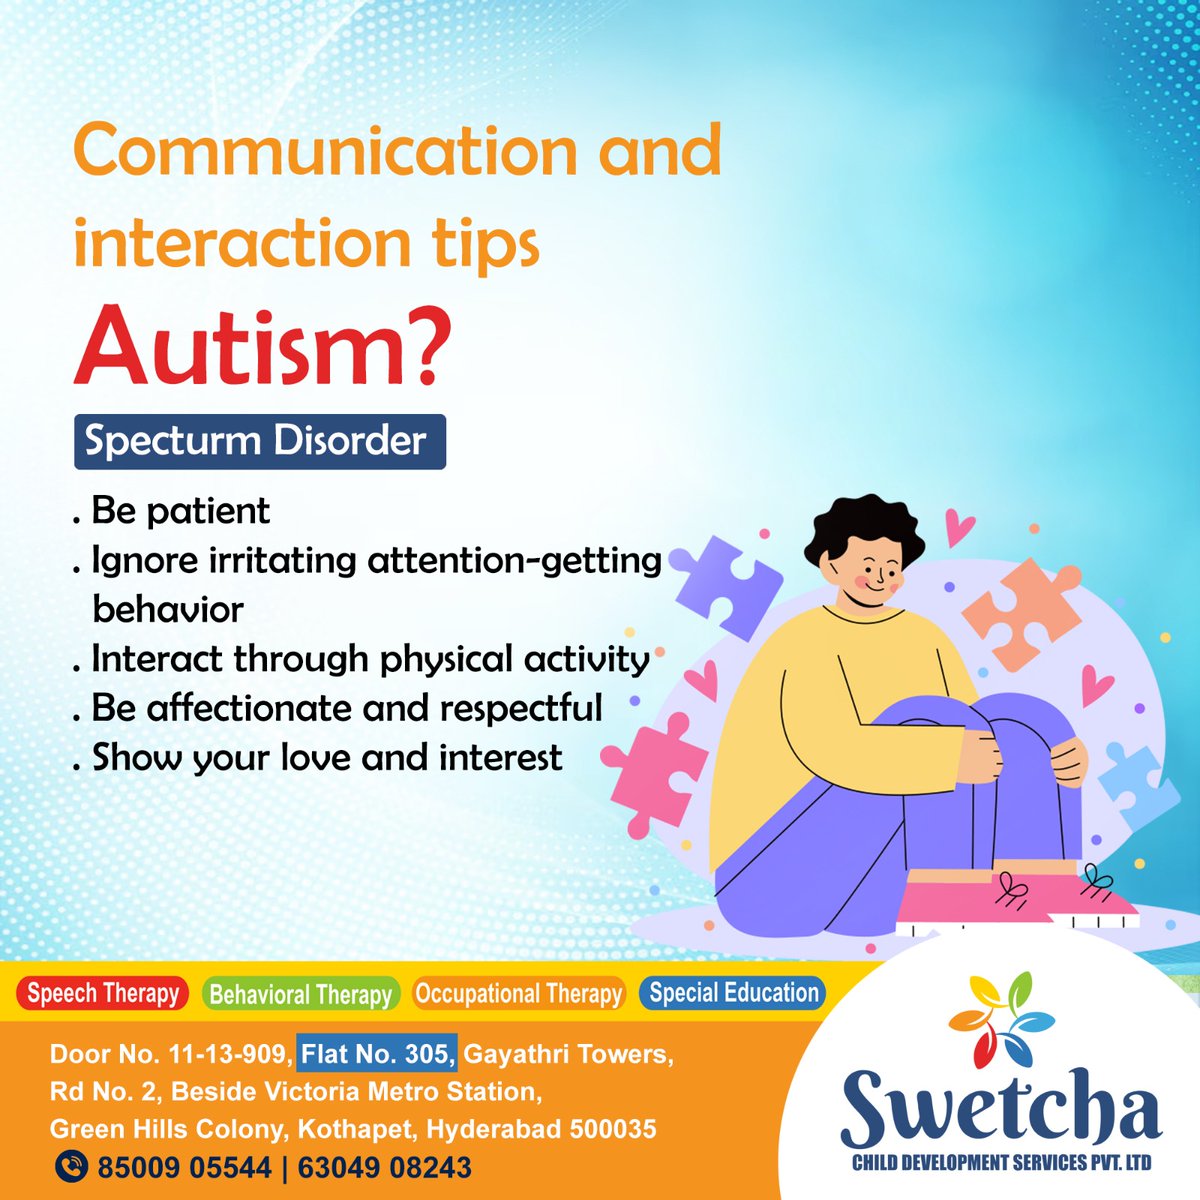 At Swetcha Child Development Pvt Ltd, effective communication and interaction are key. Here are some tips:

#autism #AutismTherapy #HolisticDevelopment #autismsupport #physciotherapy💙 #speechtherapy #BehavioralTherapy #OccupationalTherapy #SpeechEducation #Consulttoday